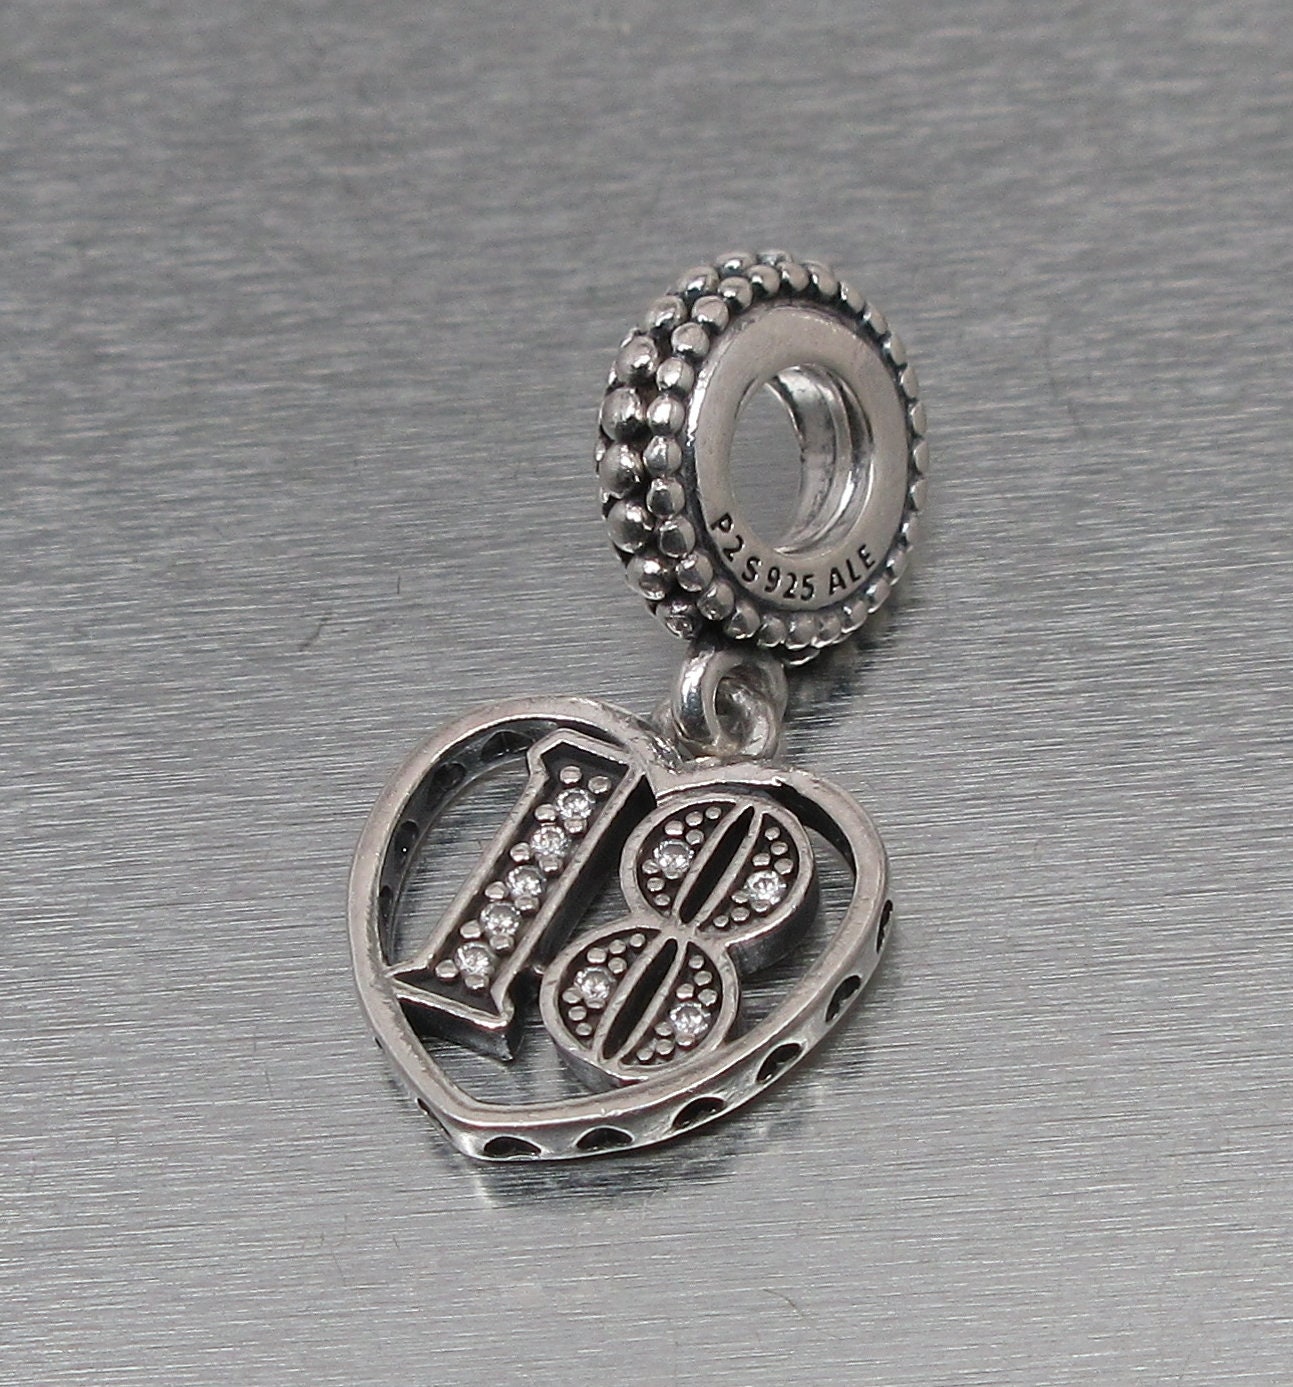 Shop PANDORA - Charms, Bracelets, Rings & Necklaces. FREE DELIVERY.